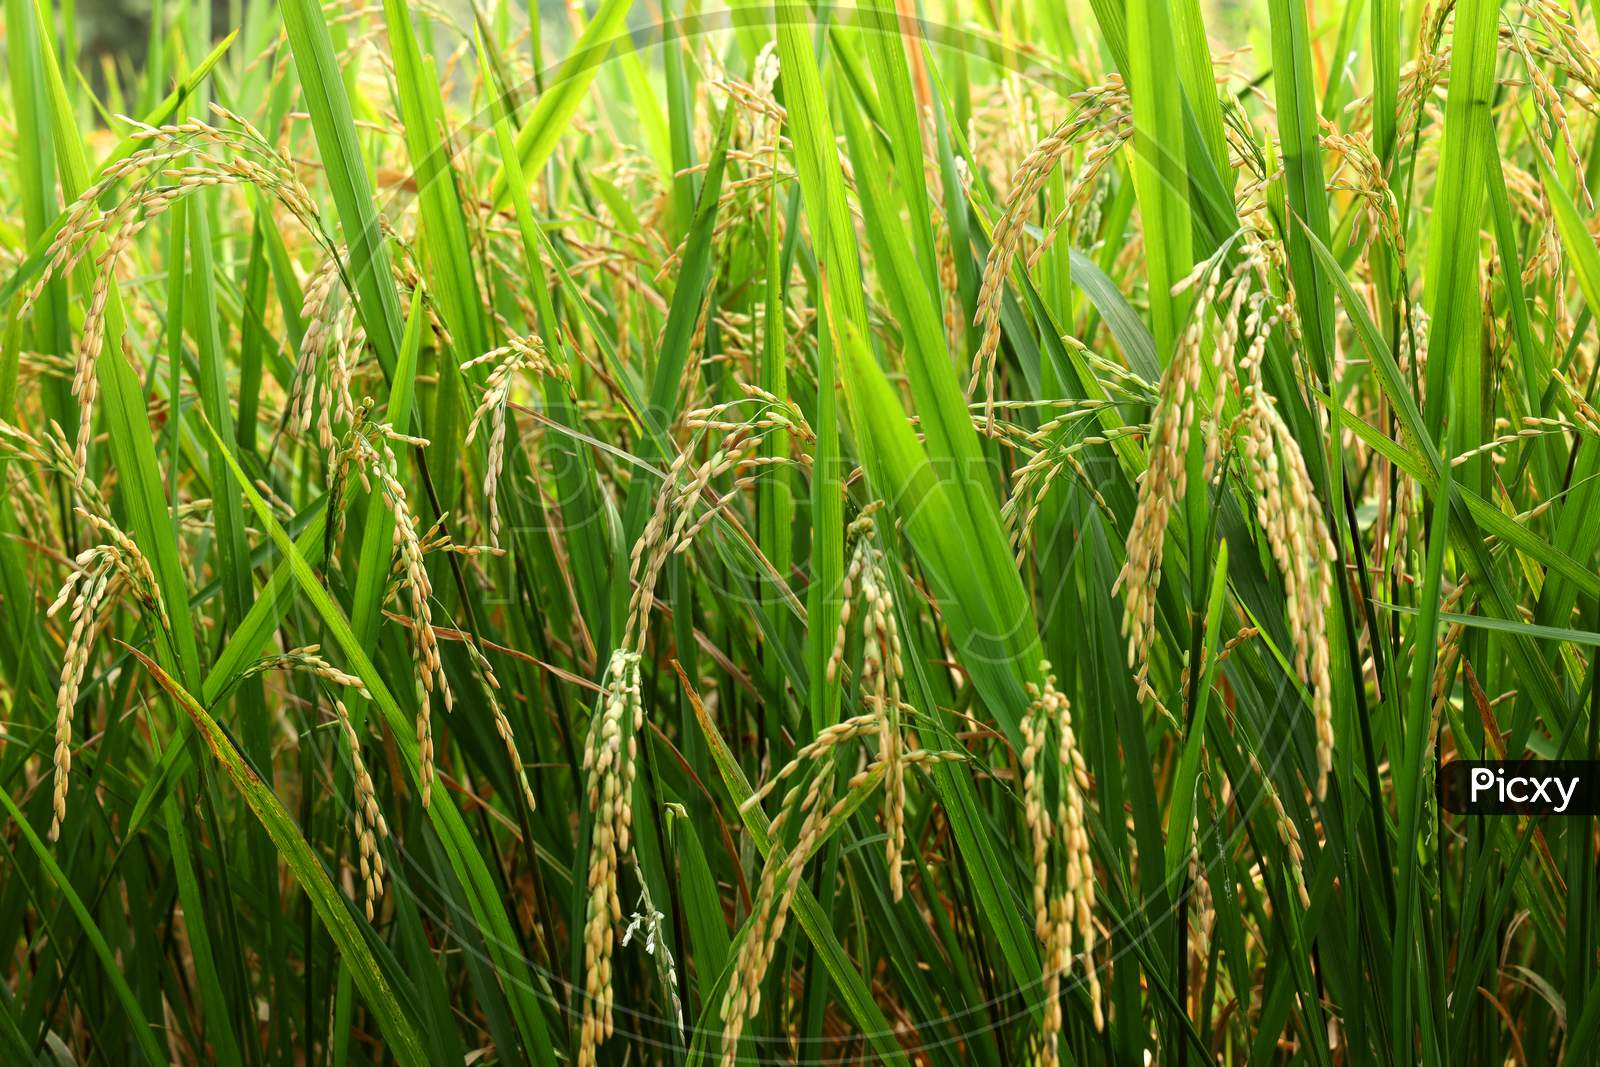 The rice whole grain from the farm field